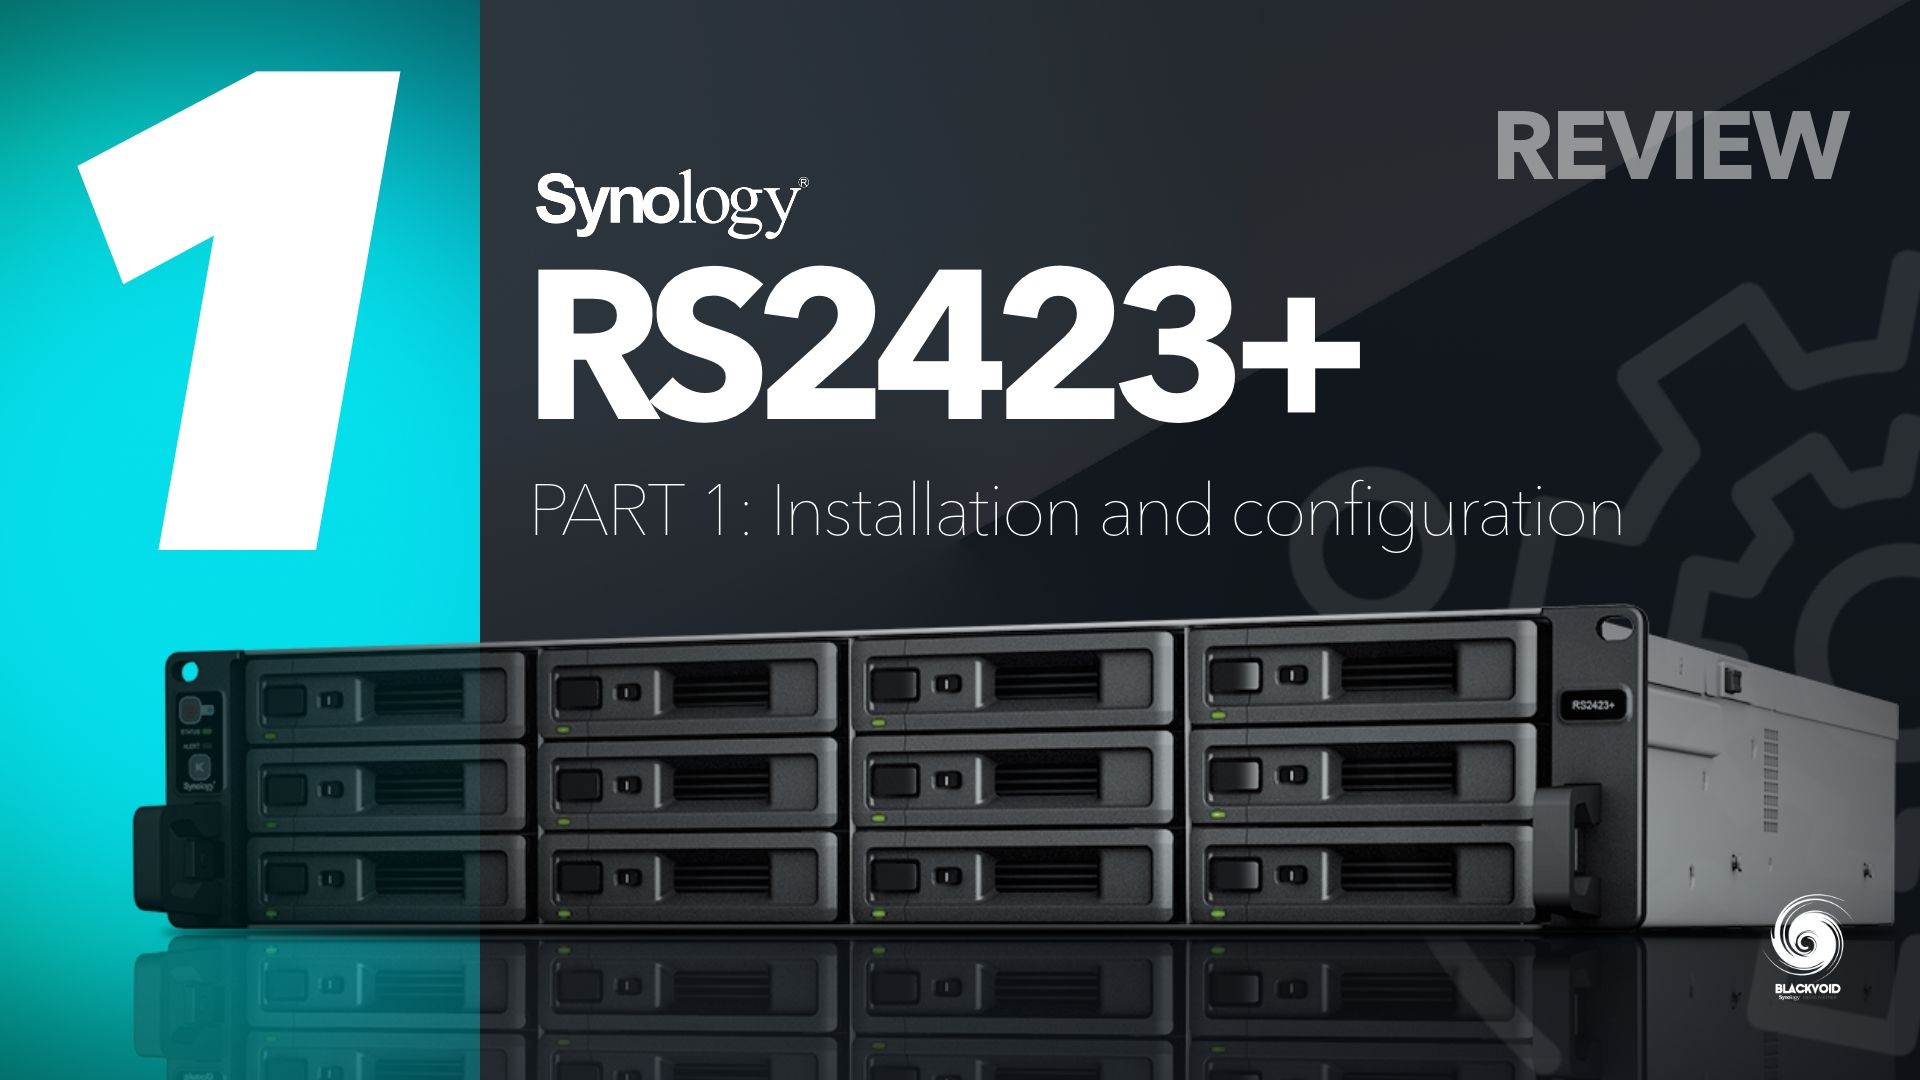 Synology RS2423+ - Part 1 Installation and configuration